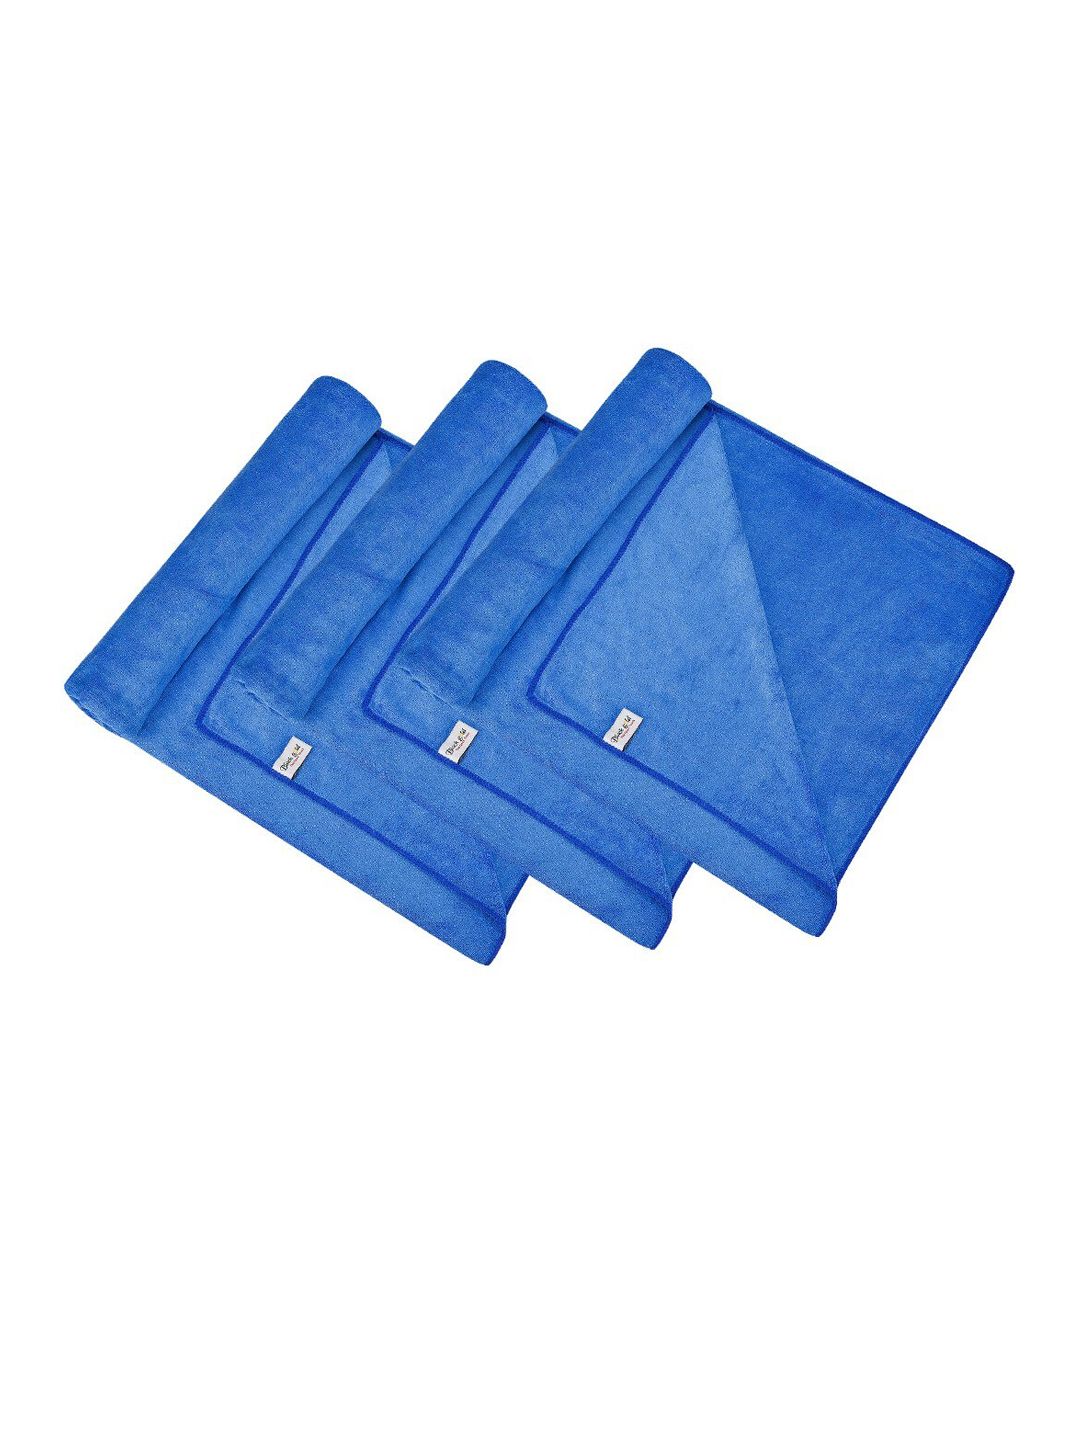 Black gold Set Of 3 Blue Solid 400 GSM Microfiber Bath Towels Price in India